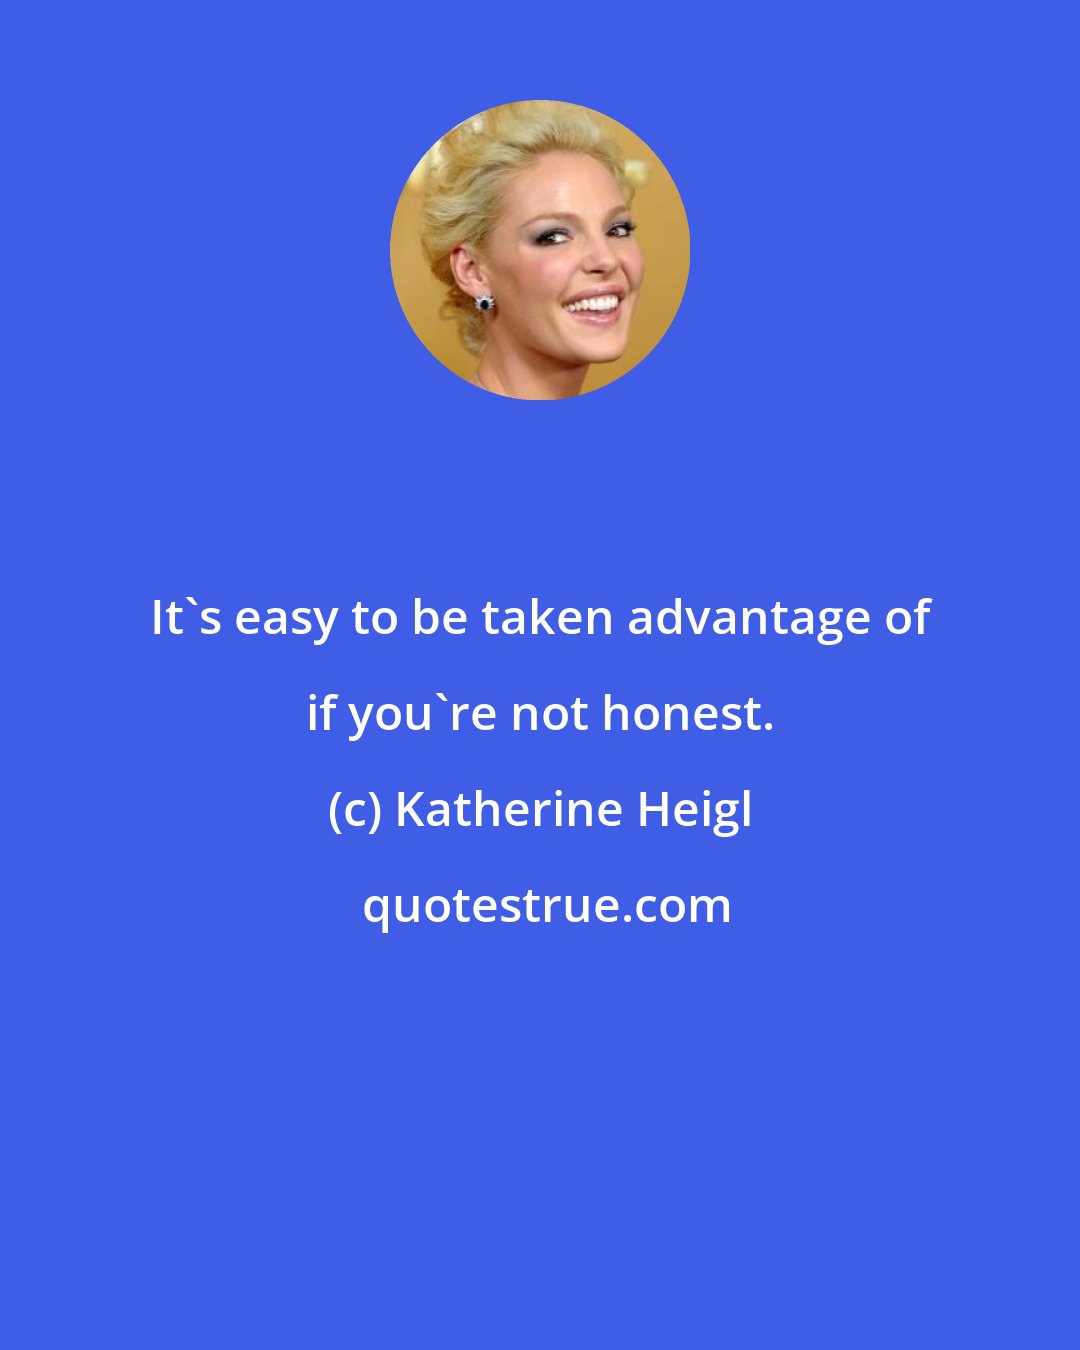 Katherine Heigl: It's easy to be taken advantage of if you're not honest.